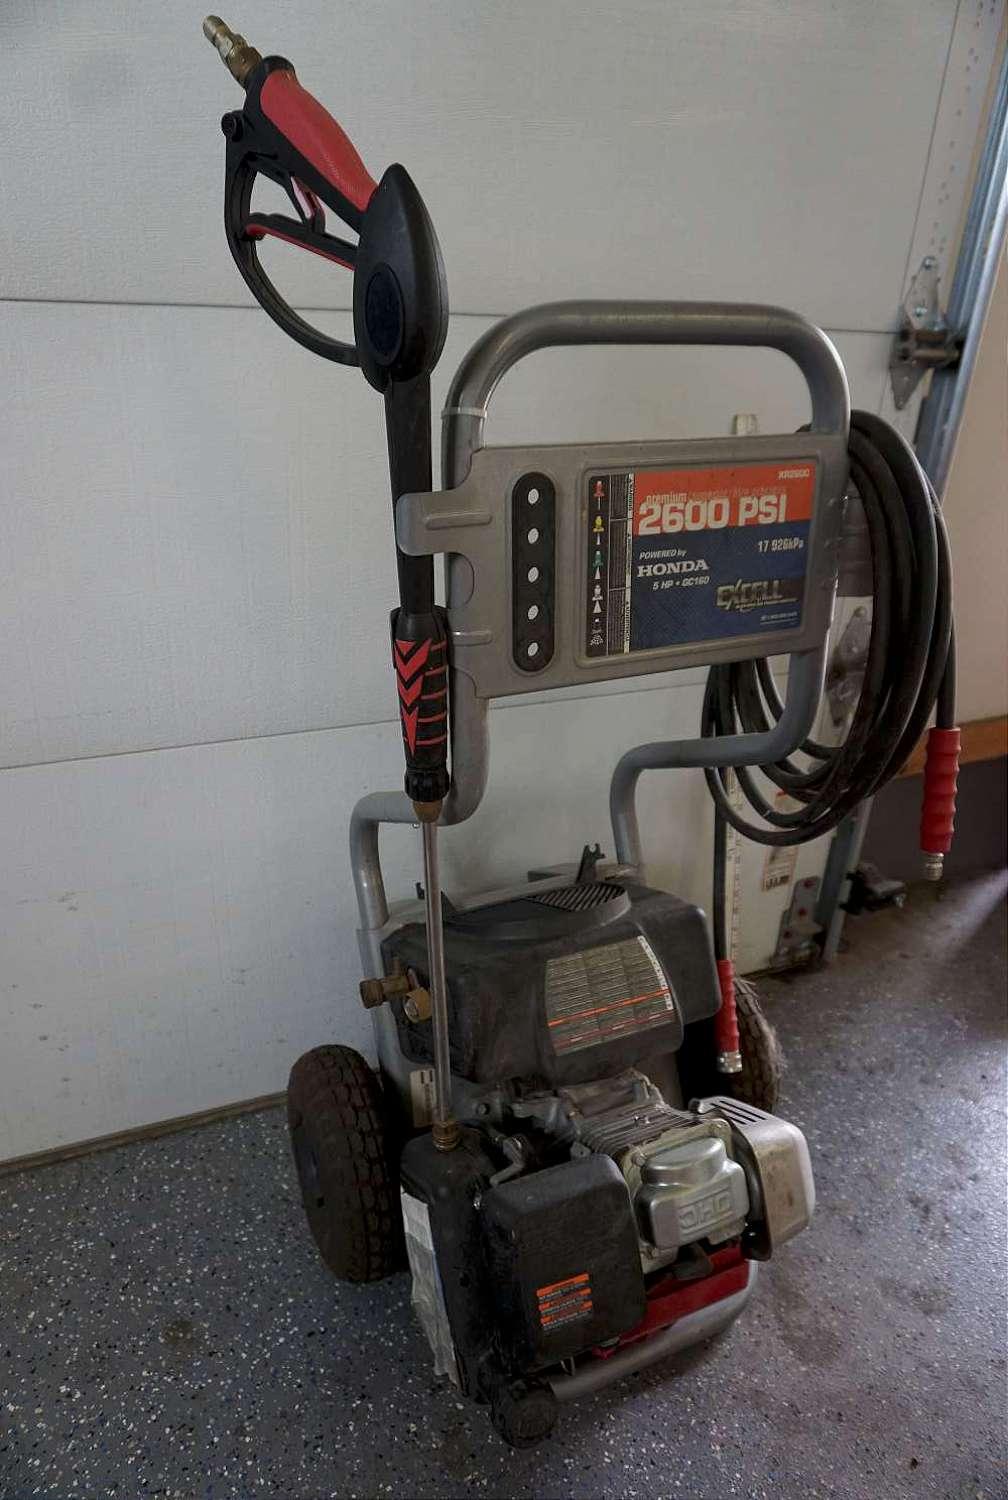 Excell Honda 2600 PSI Pressure Washer. NEVER USED